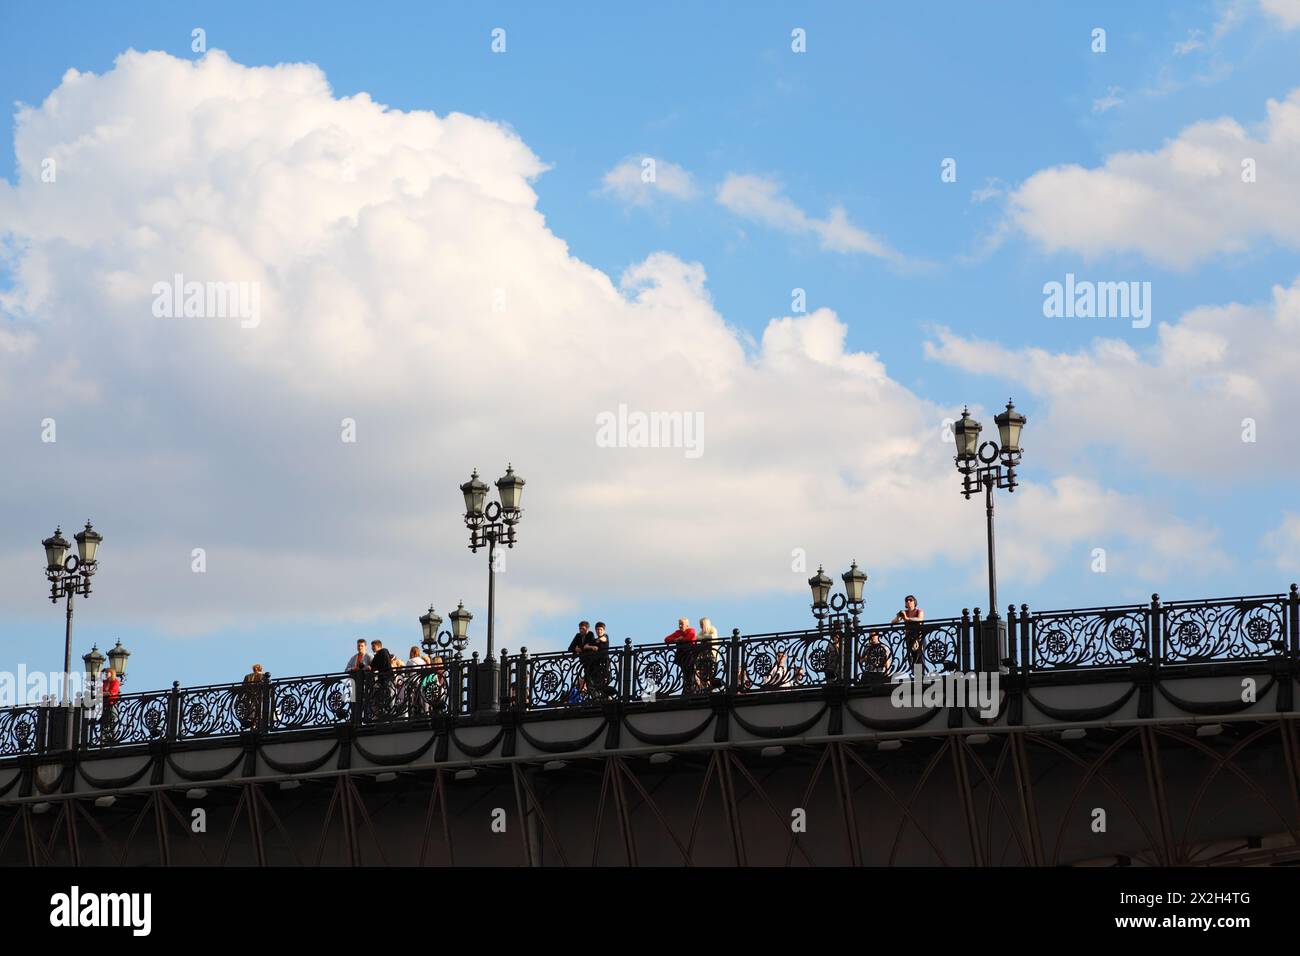 MOSCOW - MAY 29: People on Patriarchal Bridge on May 29, 2010 in Moscow, Russia. Patriarchal Bridge - pedestrian bridge in Moscow, which was opened in Stock Photo